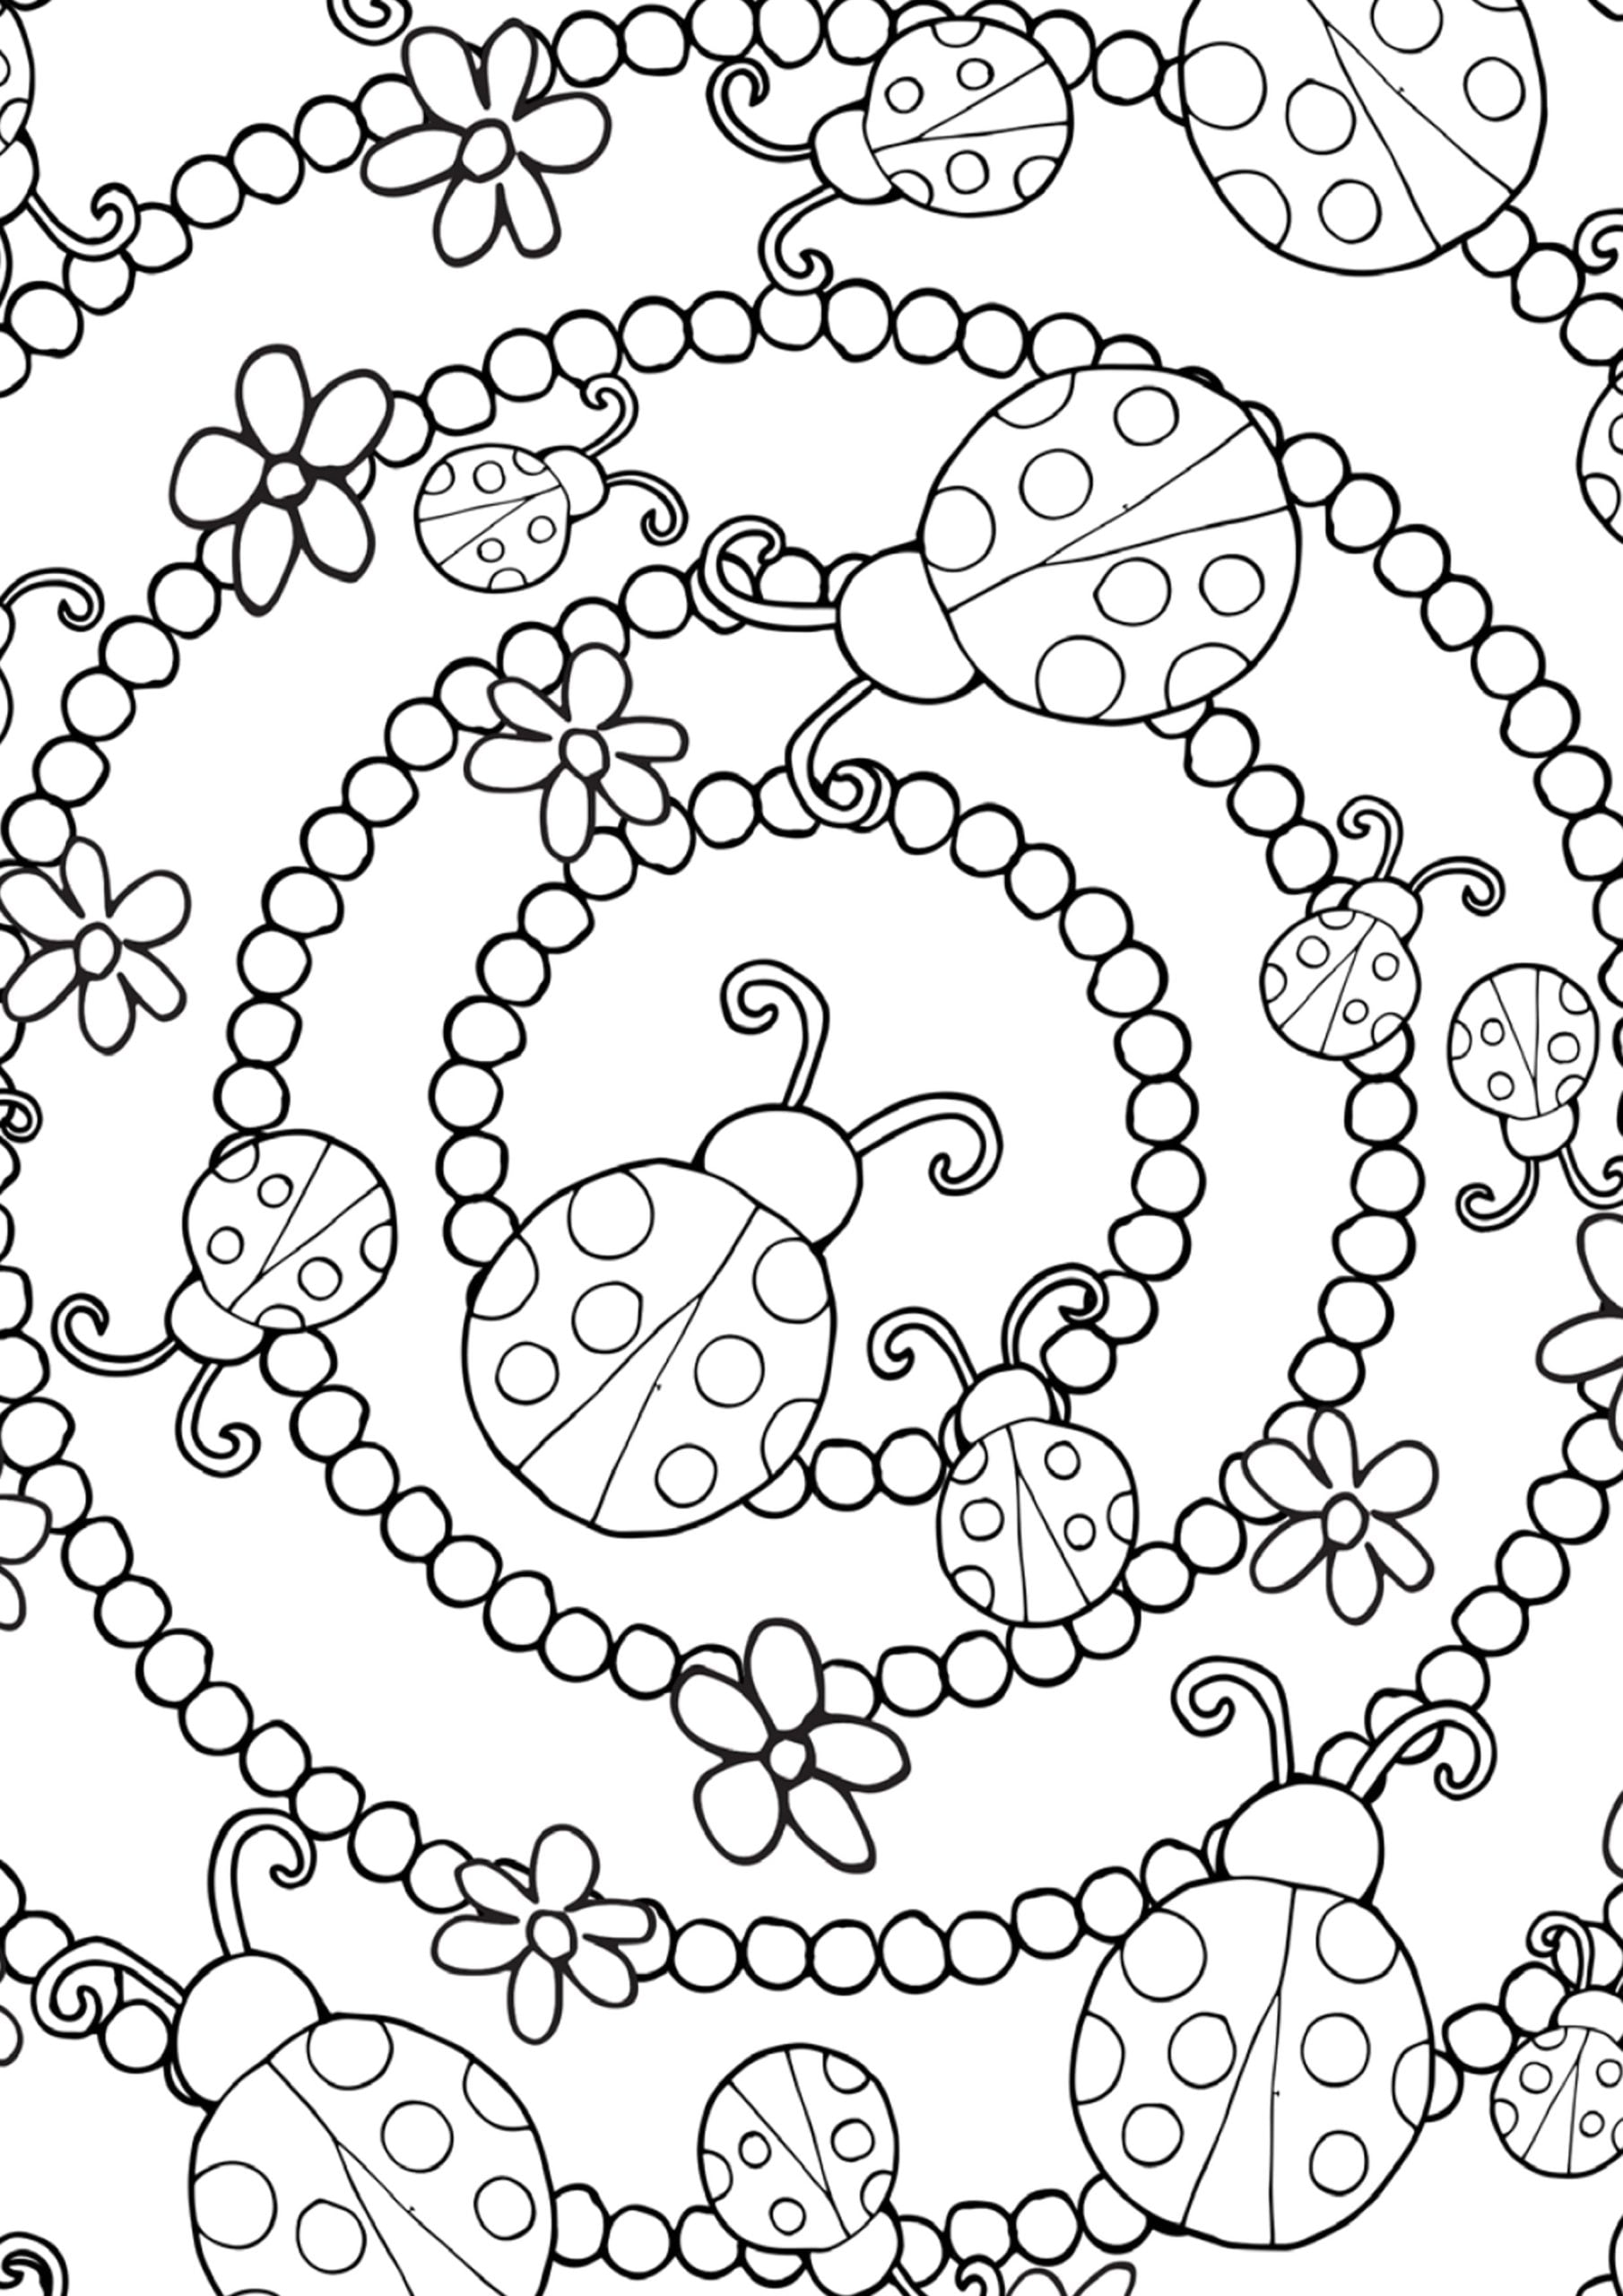 257 Adult coloring pages color by number 图片、库存照片、3D 物体和矢量图